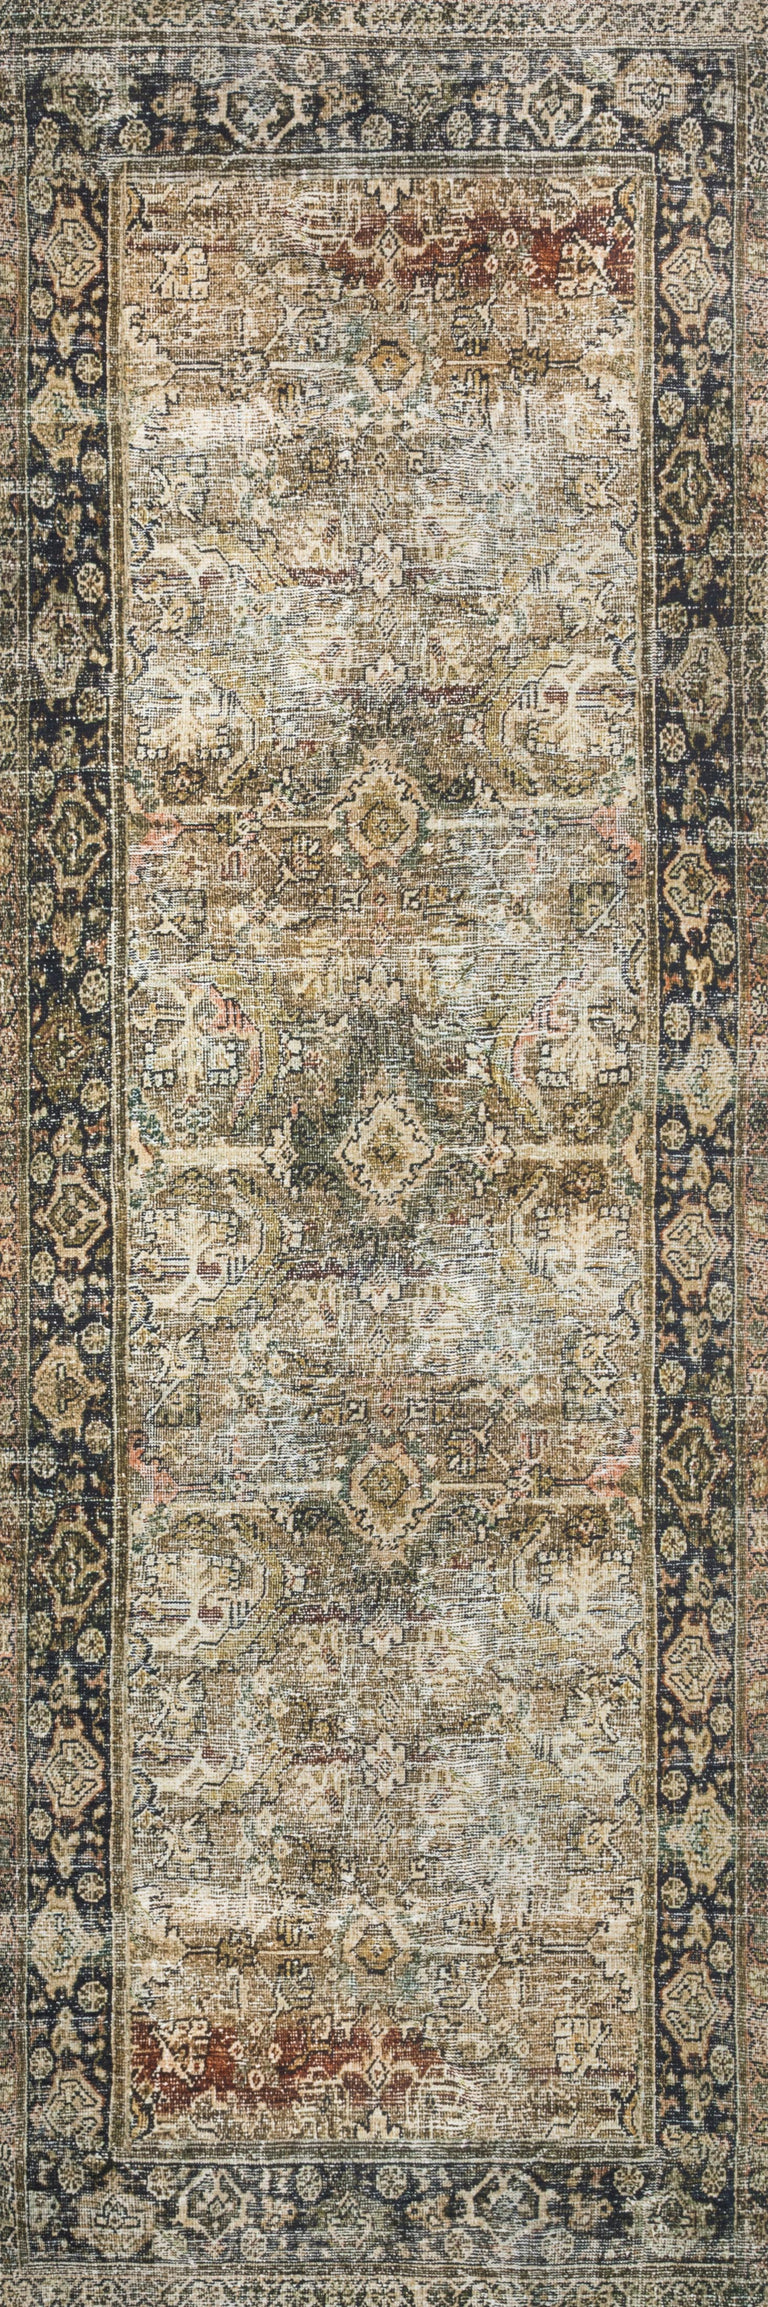 Loloi II Layla Collection Rug in Olive, Charcoal - 3'6" x 5'6"